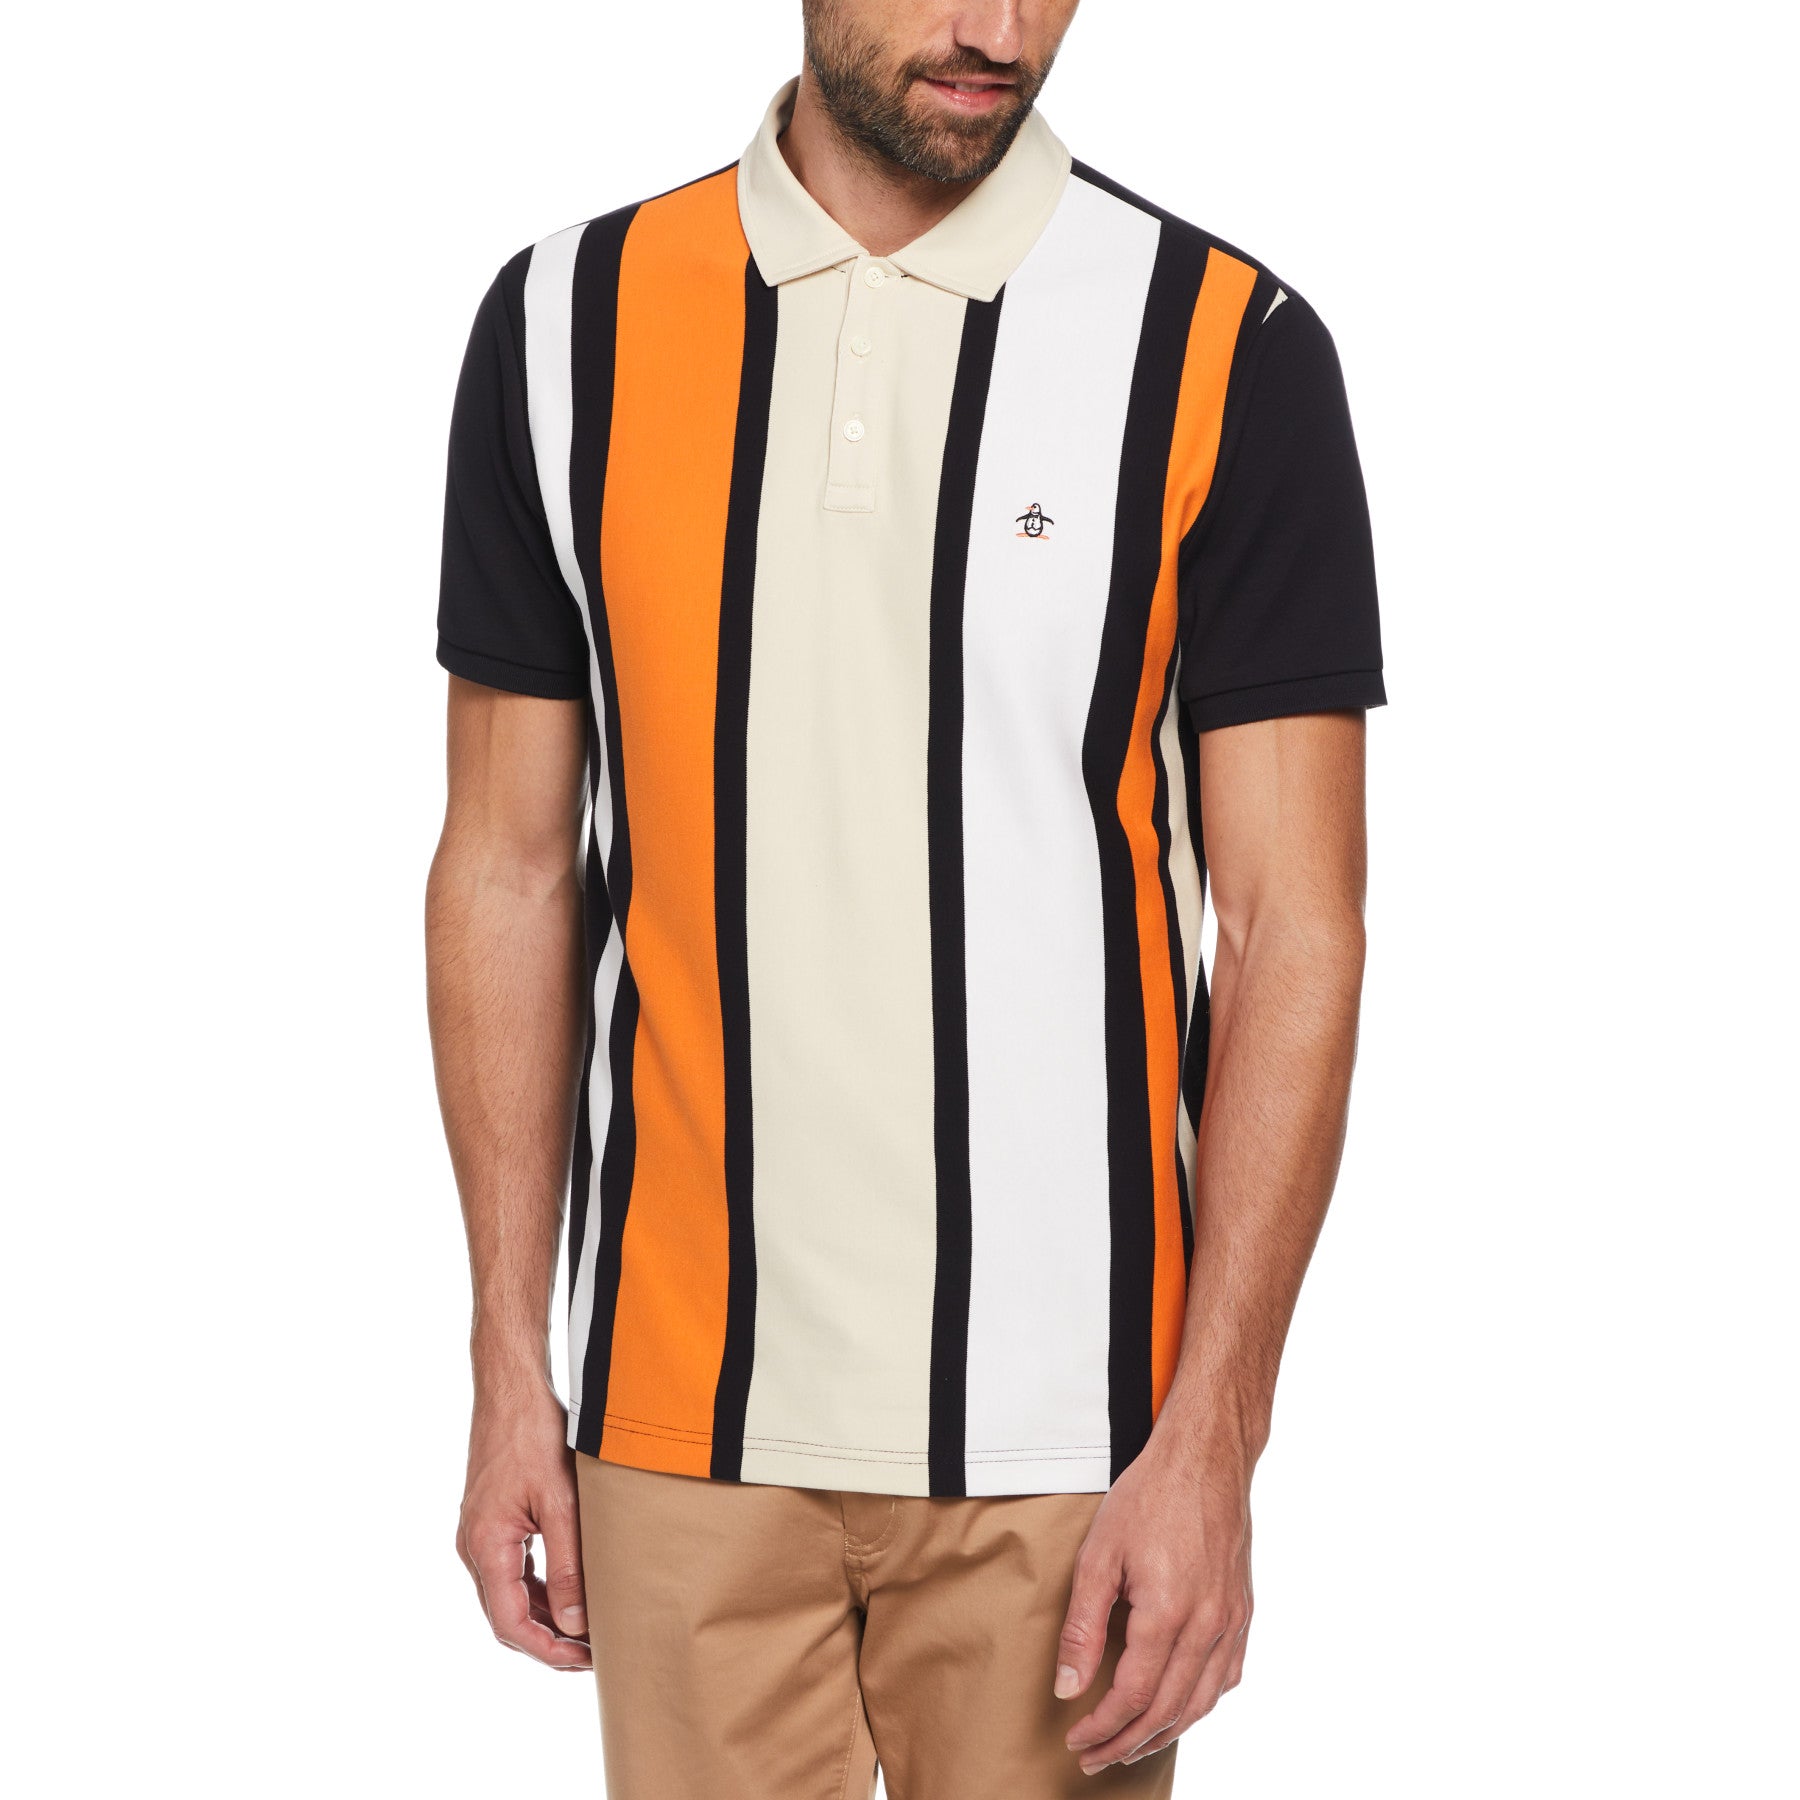 View Icons Vertical Stripe Polo Shirt In True Black information